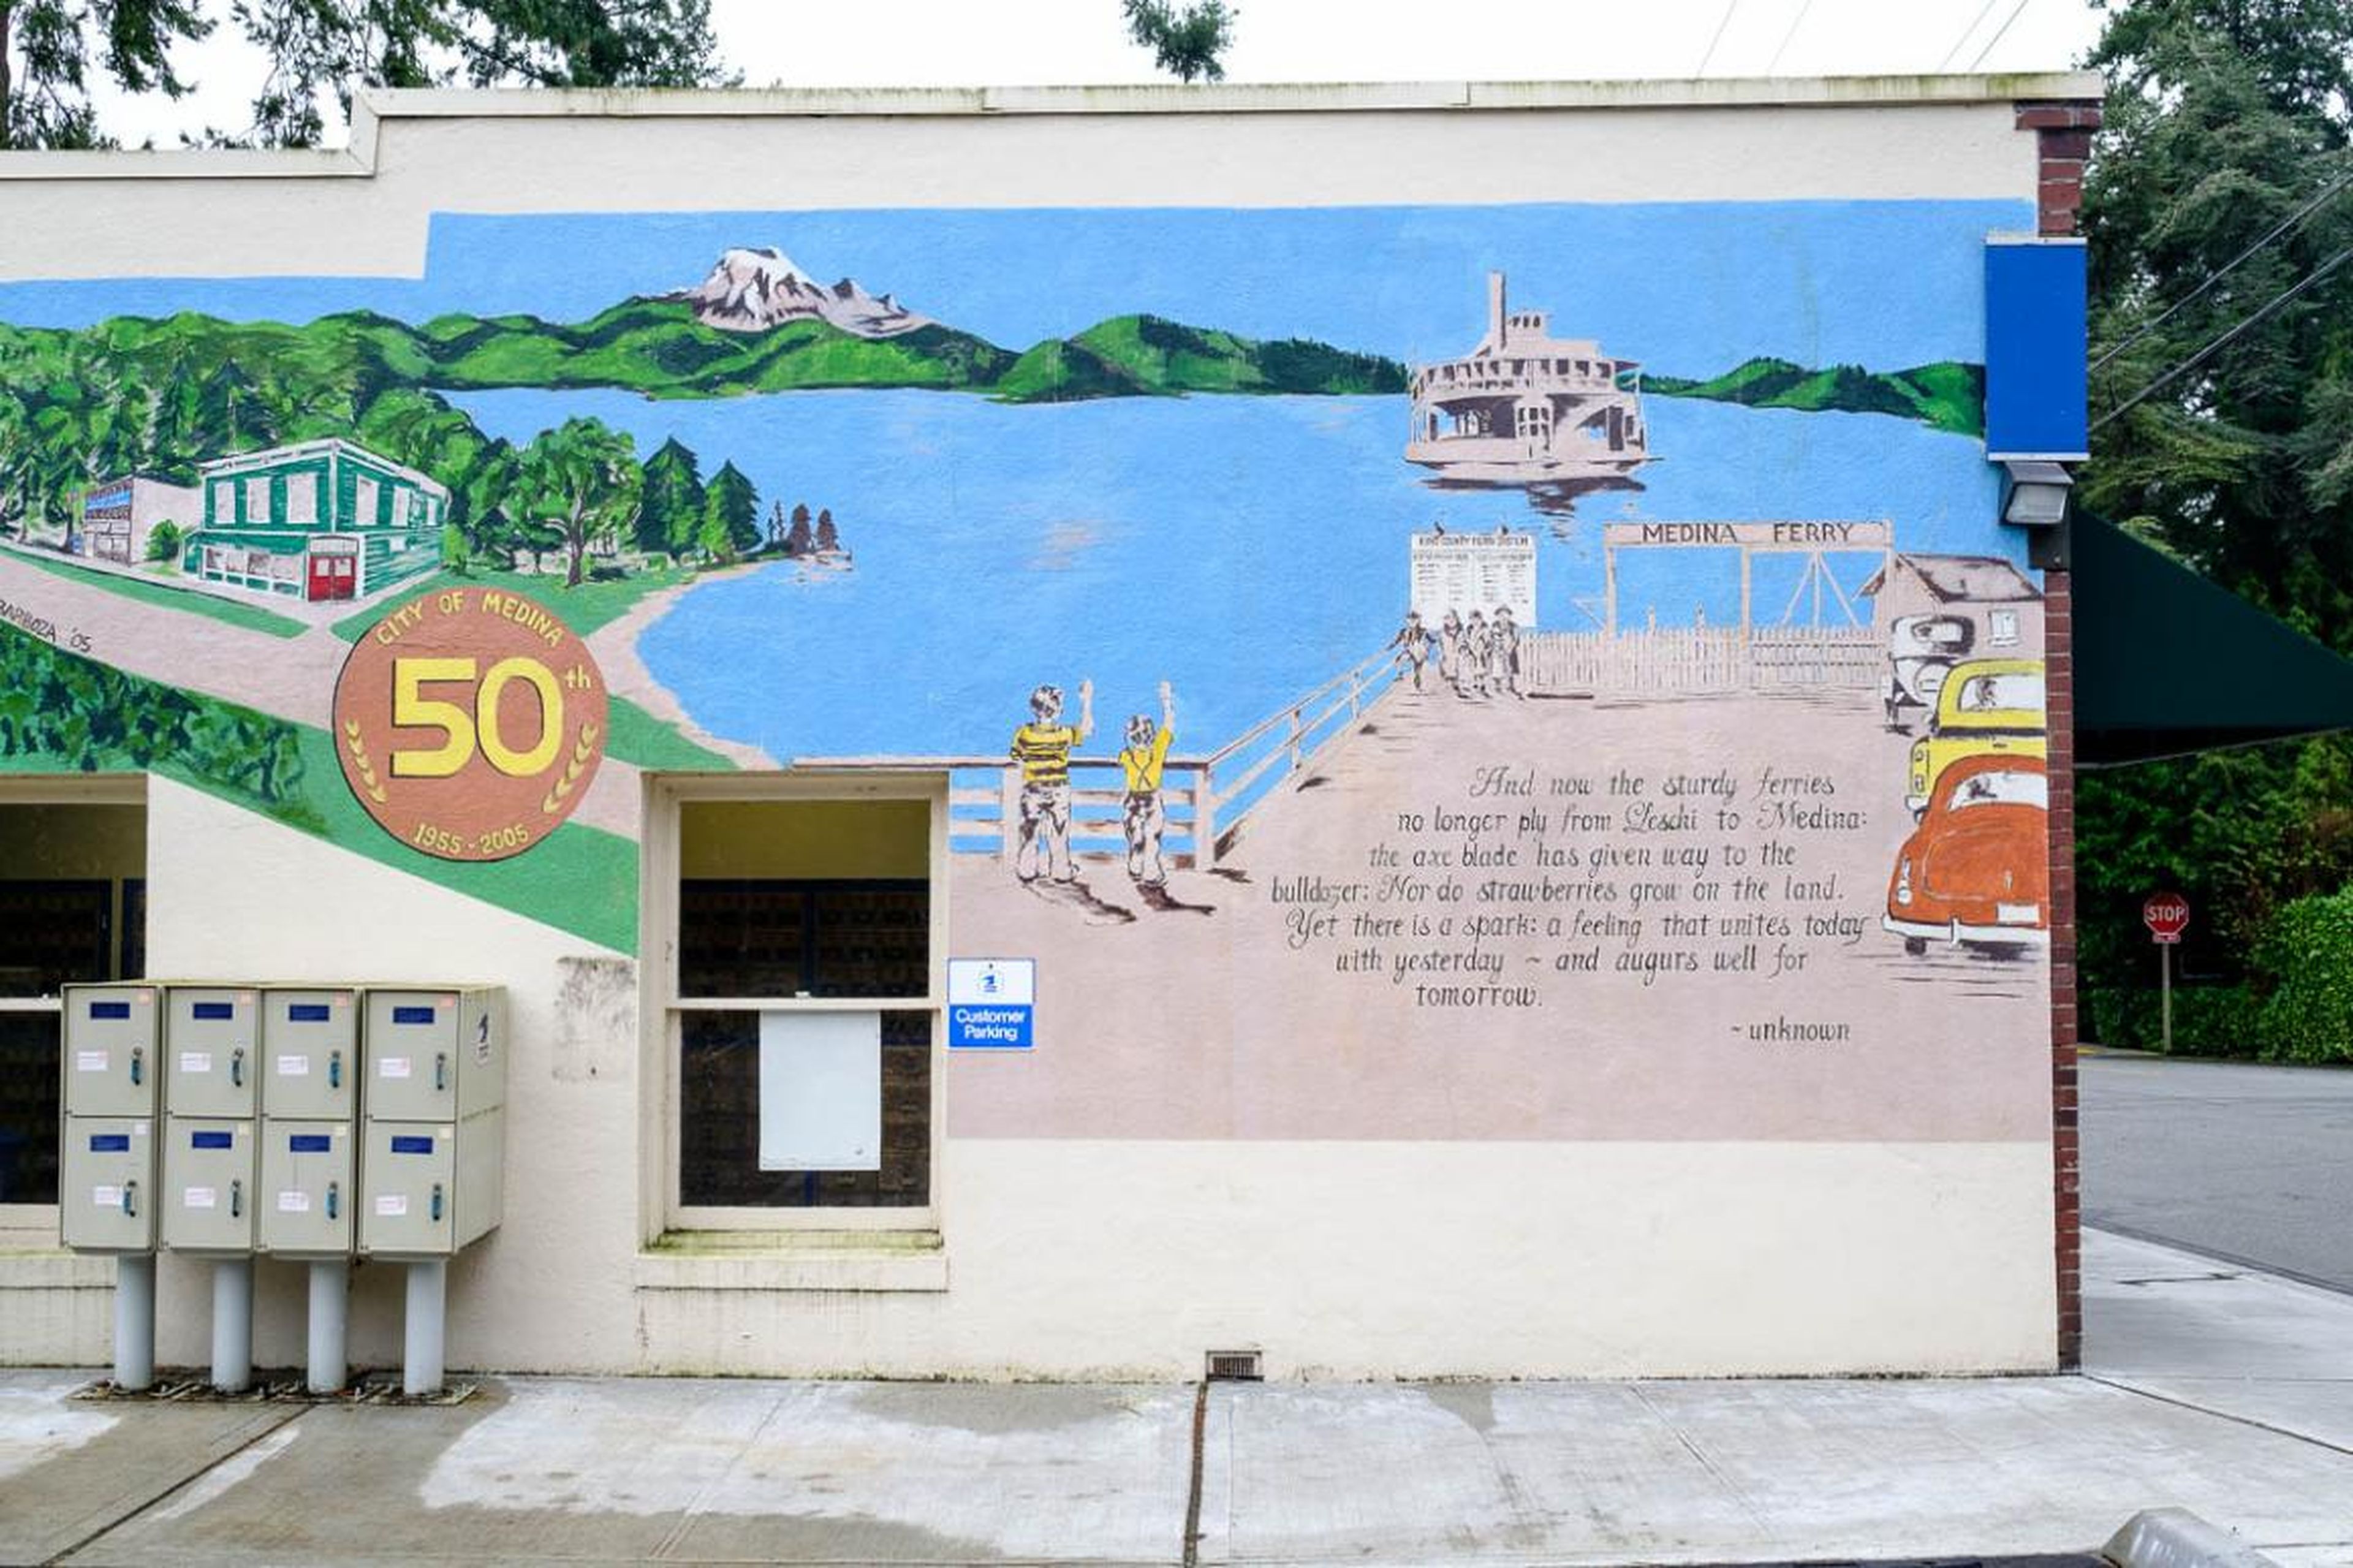 There is a mural on the side of the post office recounting the incorporation of Medina in 1955. The city was first settled in 1891 and named after a city in Saudi Arabia.